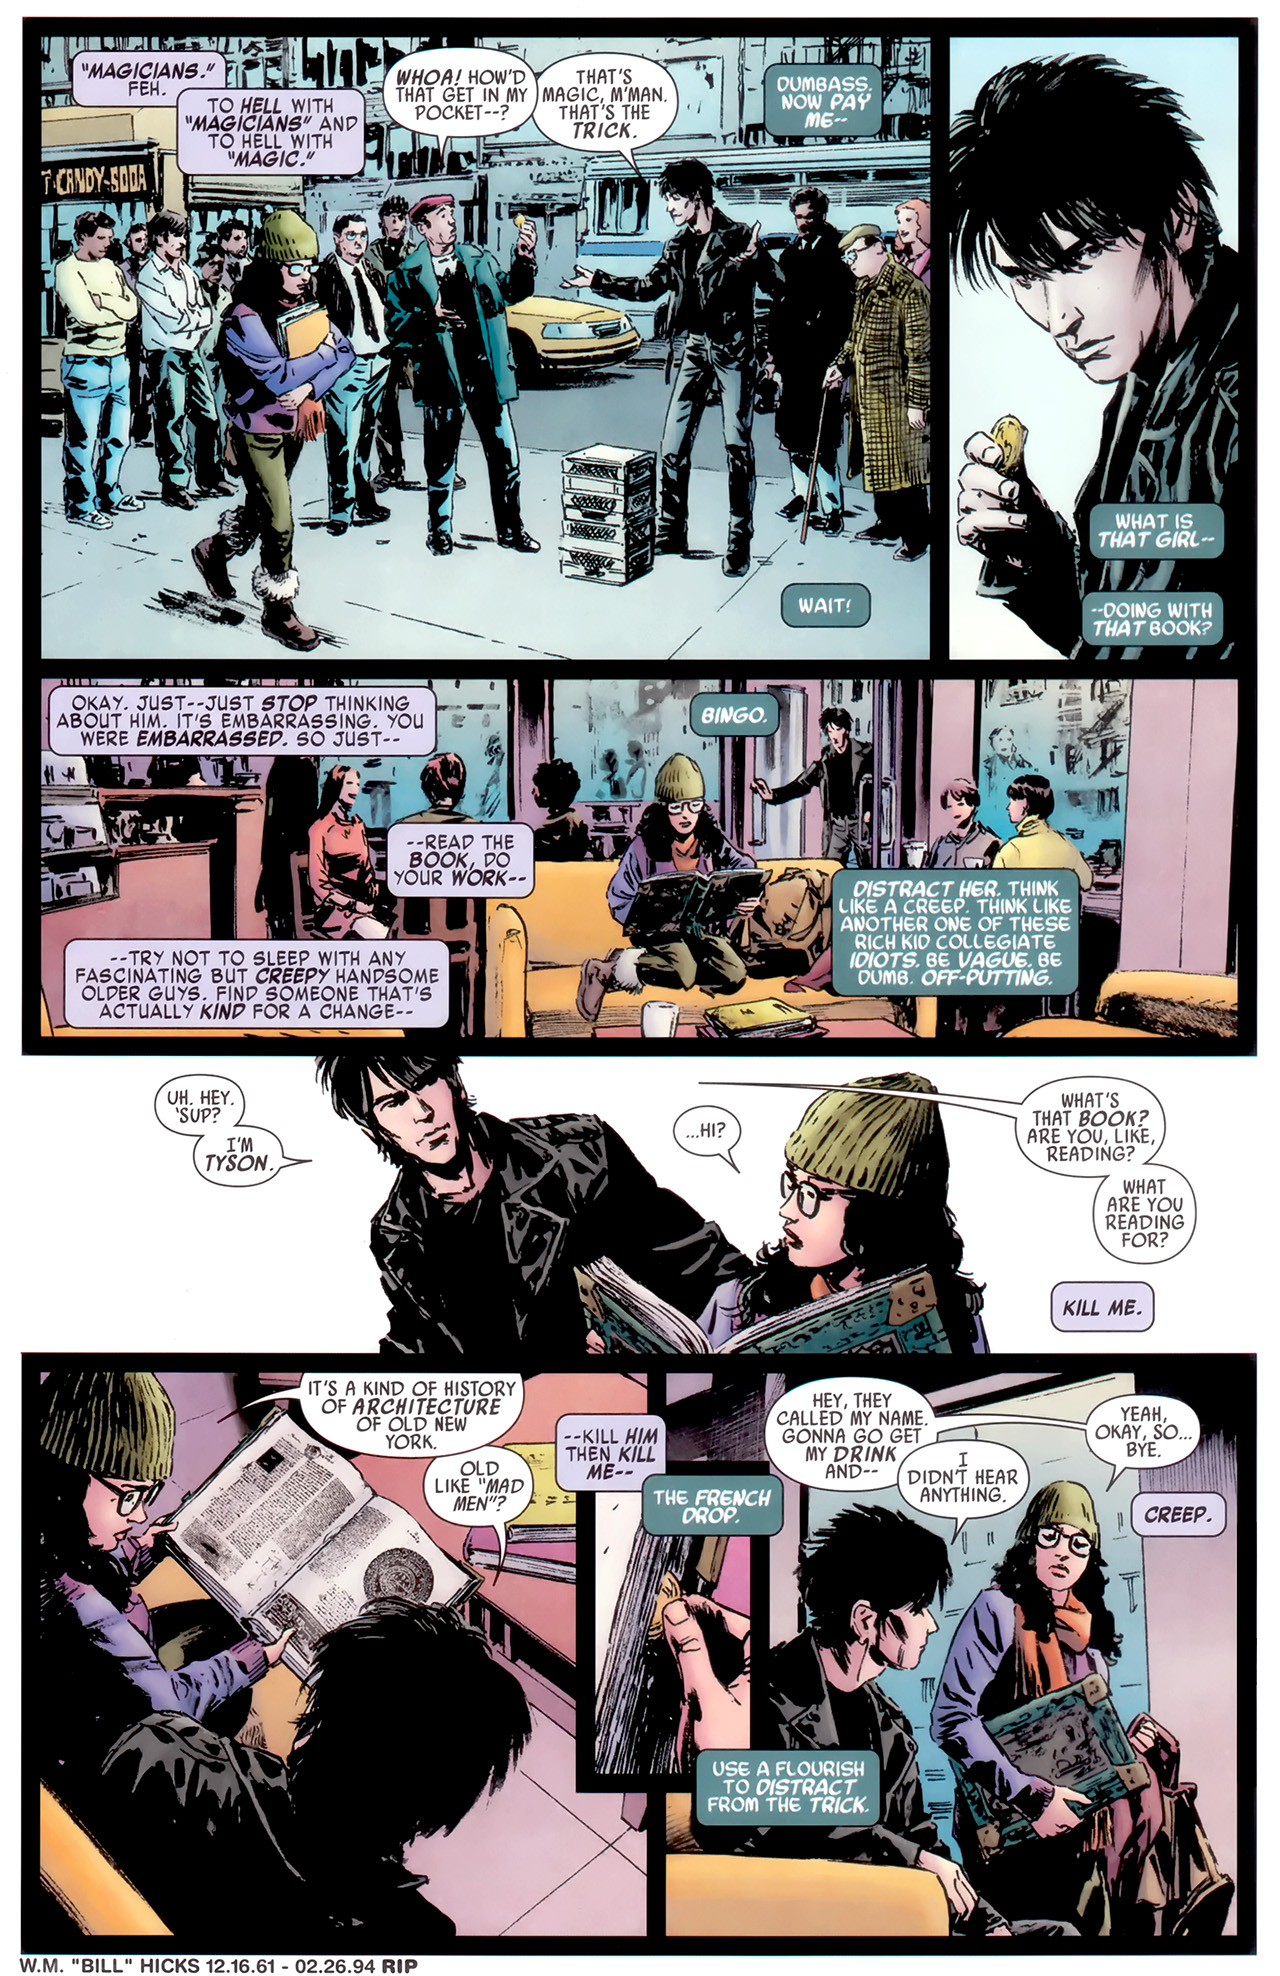 Defenders (2012) Issue #4 #4 - English 8